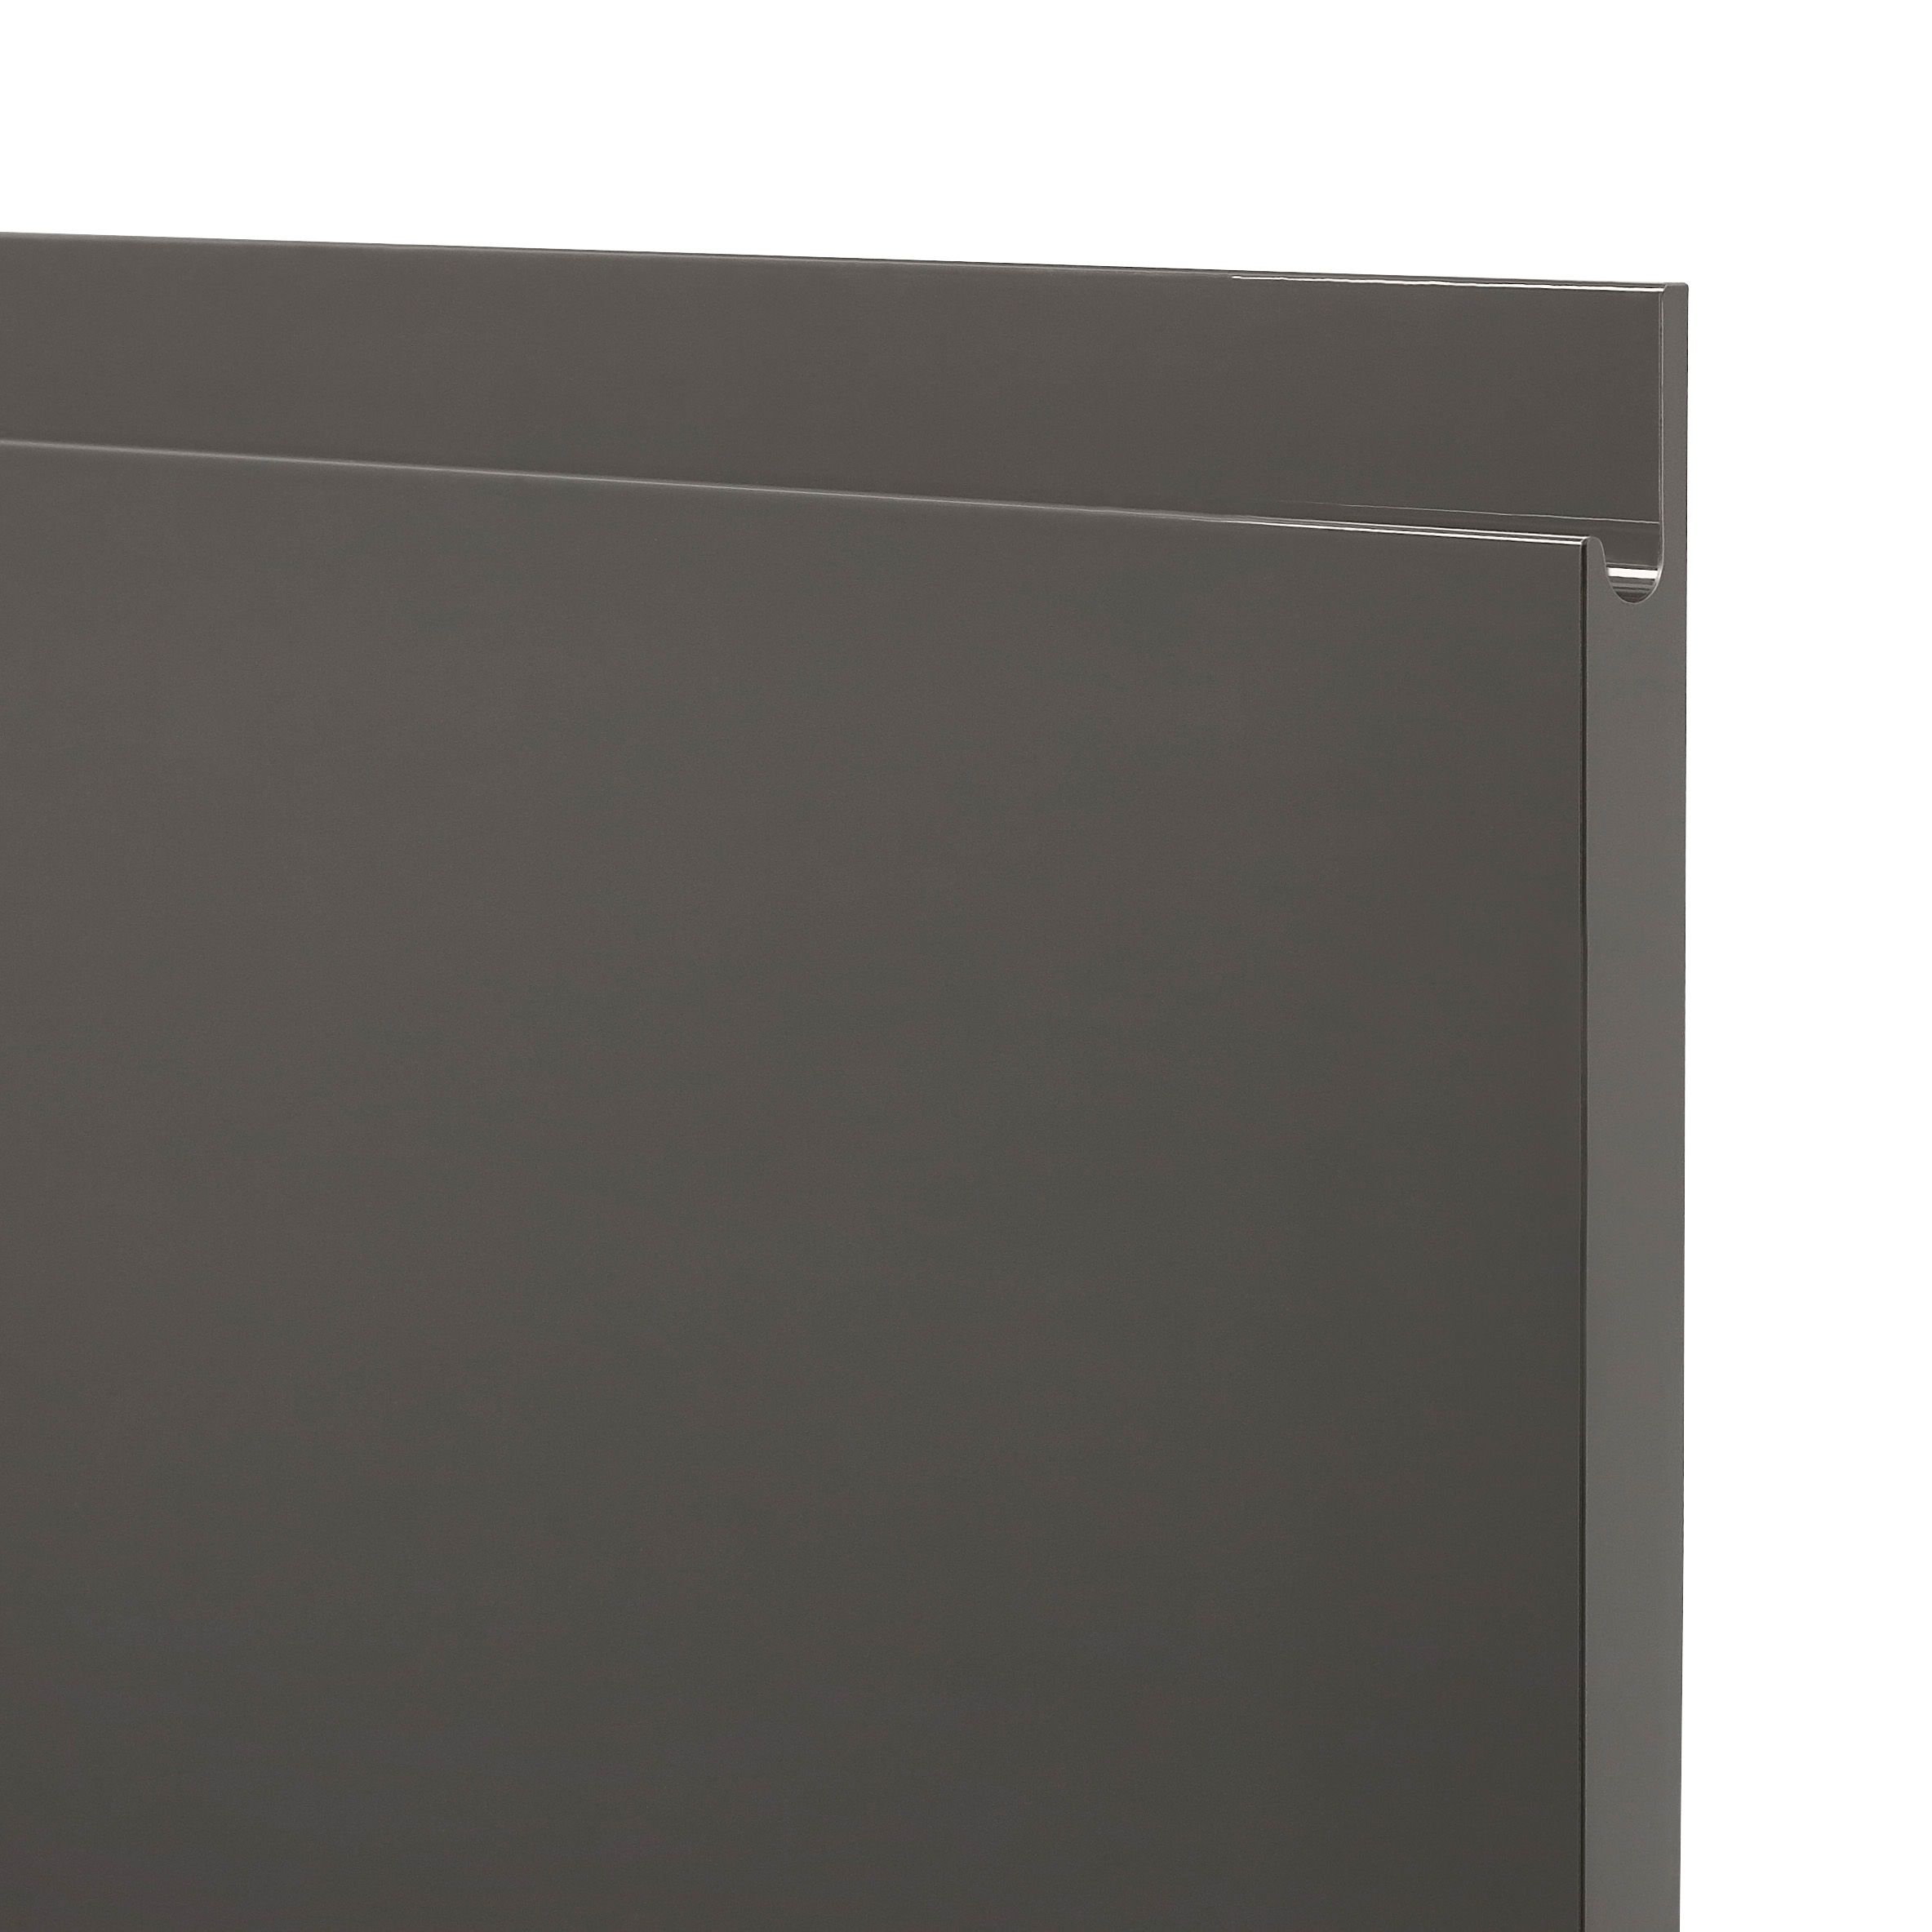 GoodHome Garcinia Gloss anthracite integrated handle 70:30 Larder Cabinet door (W)600mm (H)1287mm (T)19mm